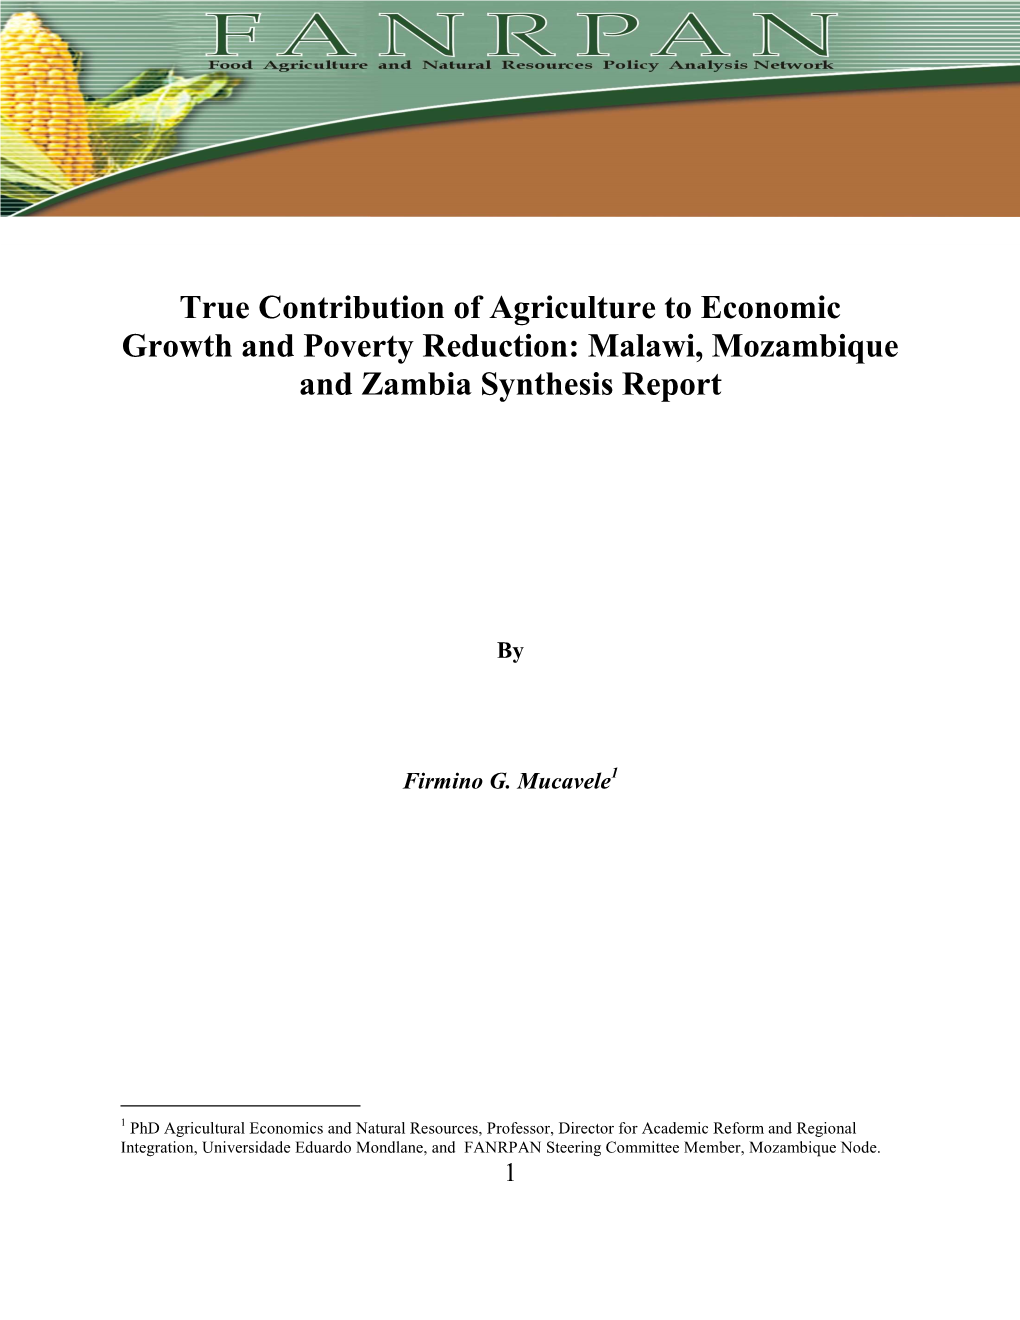 True Contribution of Agriculture to Economic Growth and Poverty Reduction: Malawi, Mozambique and Zambia Synthesis Report